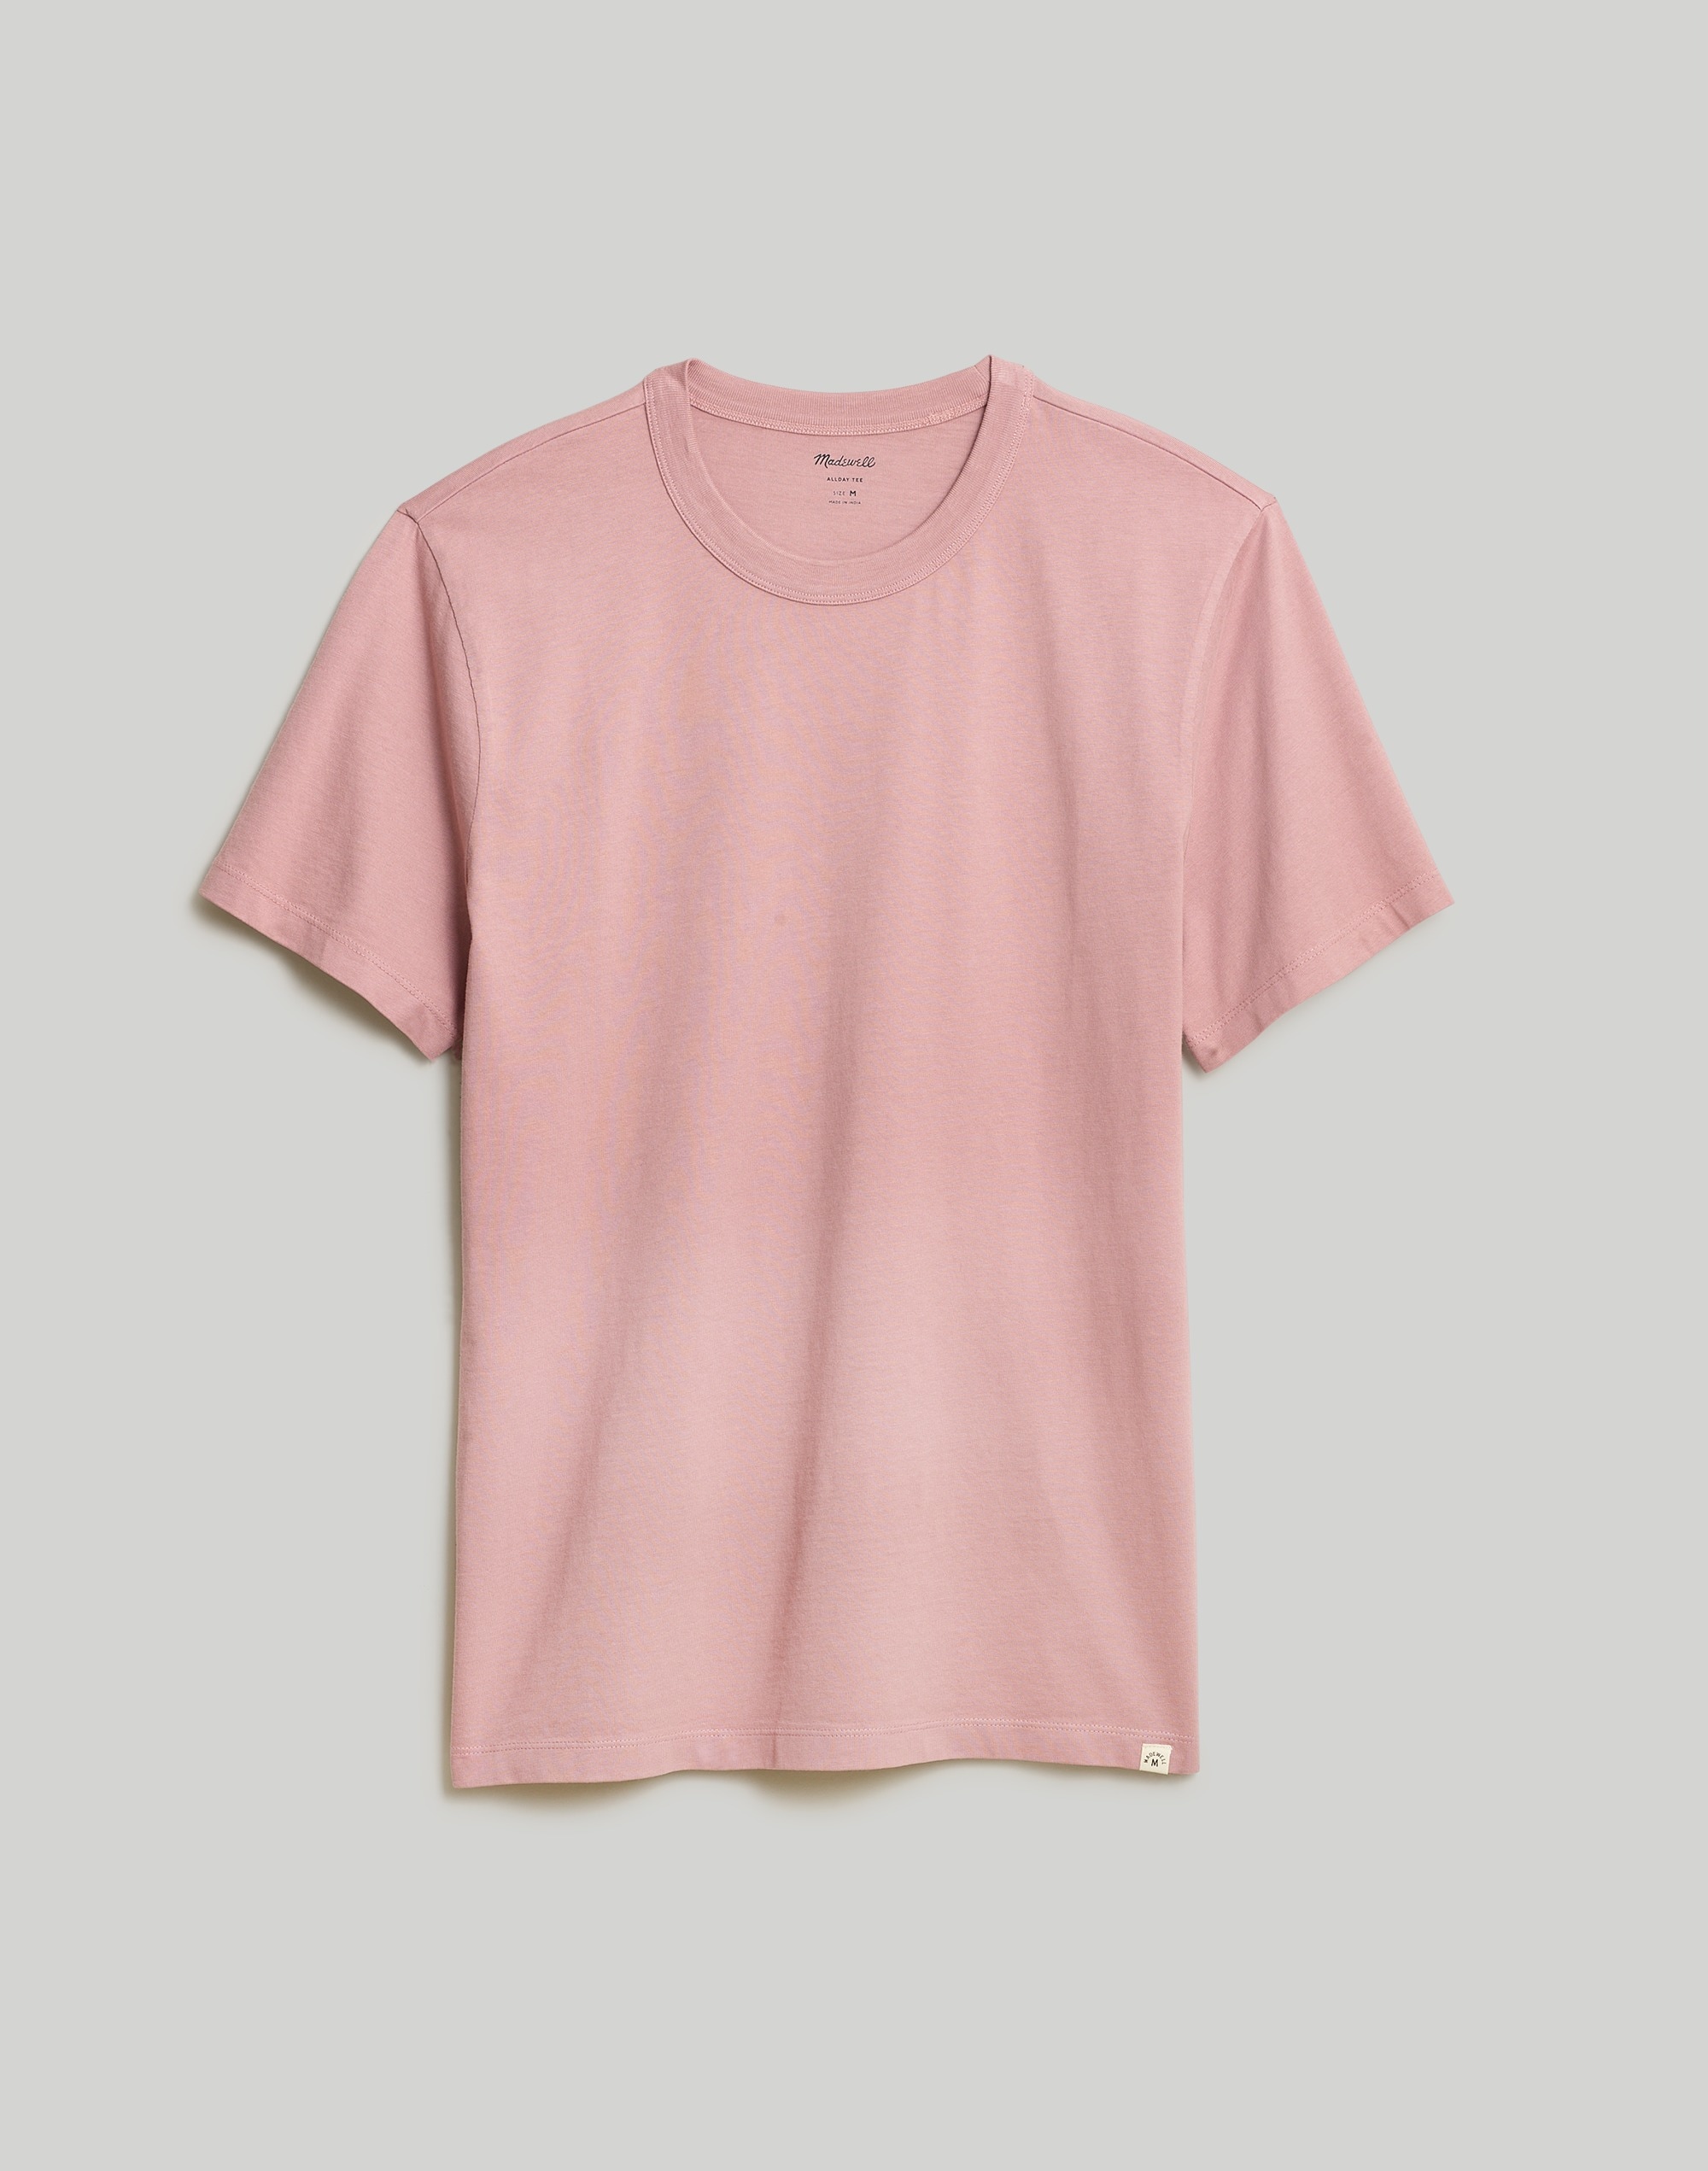 Garment-dyed Allday Crewneck Tee In Pale Thistle